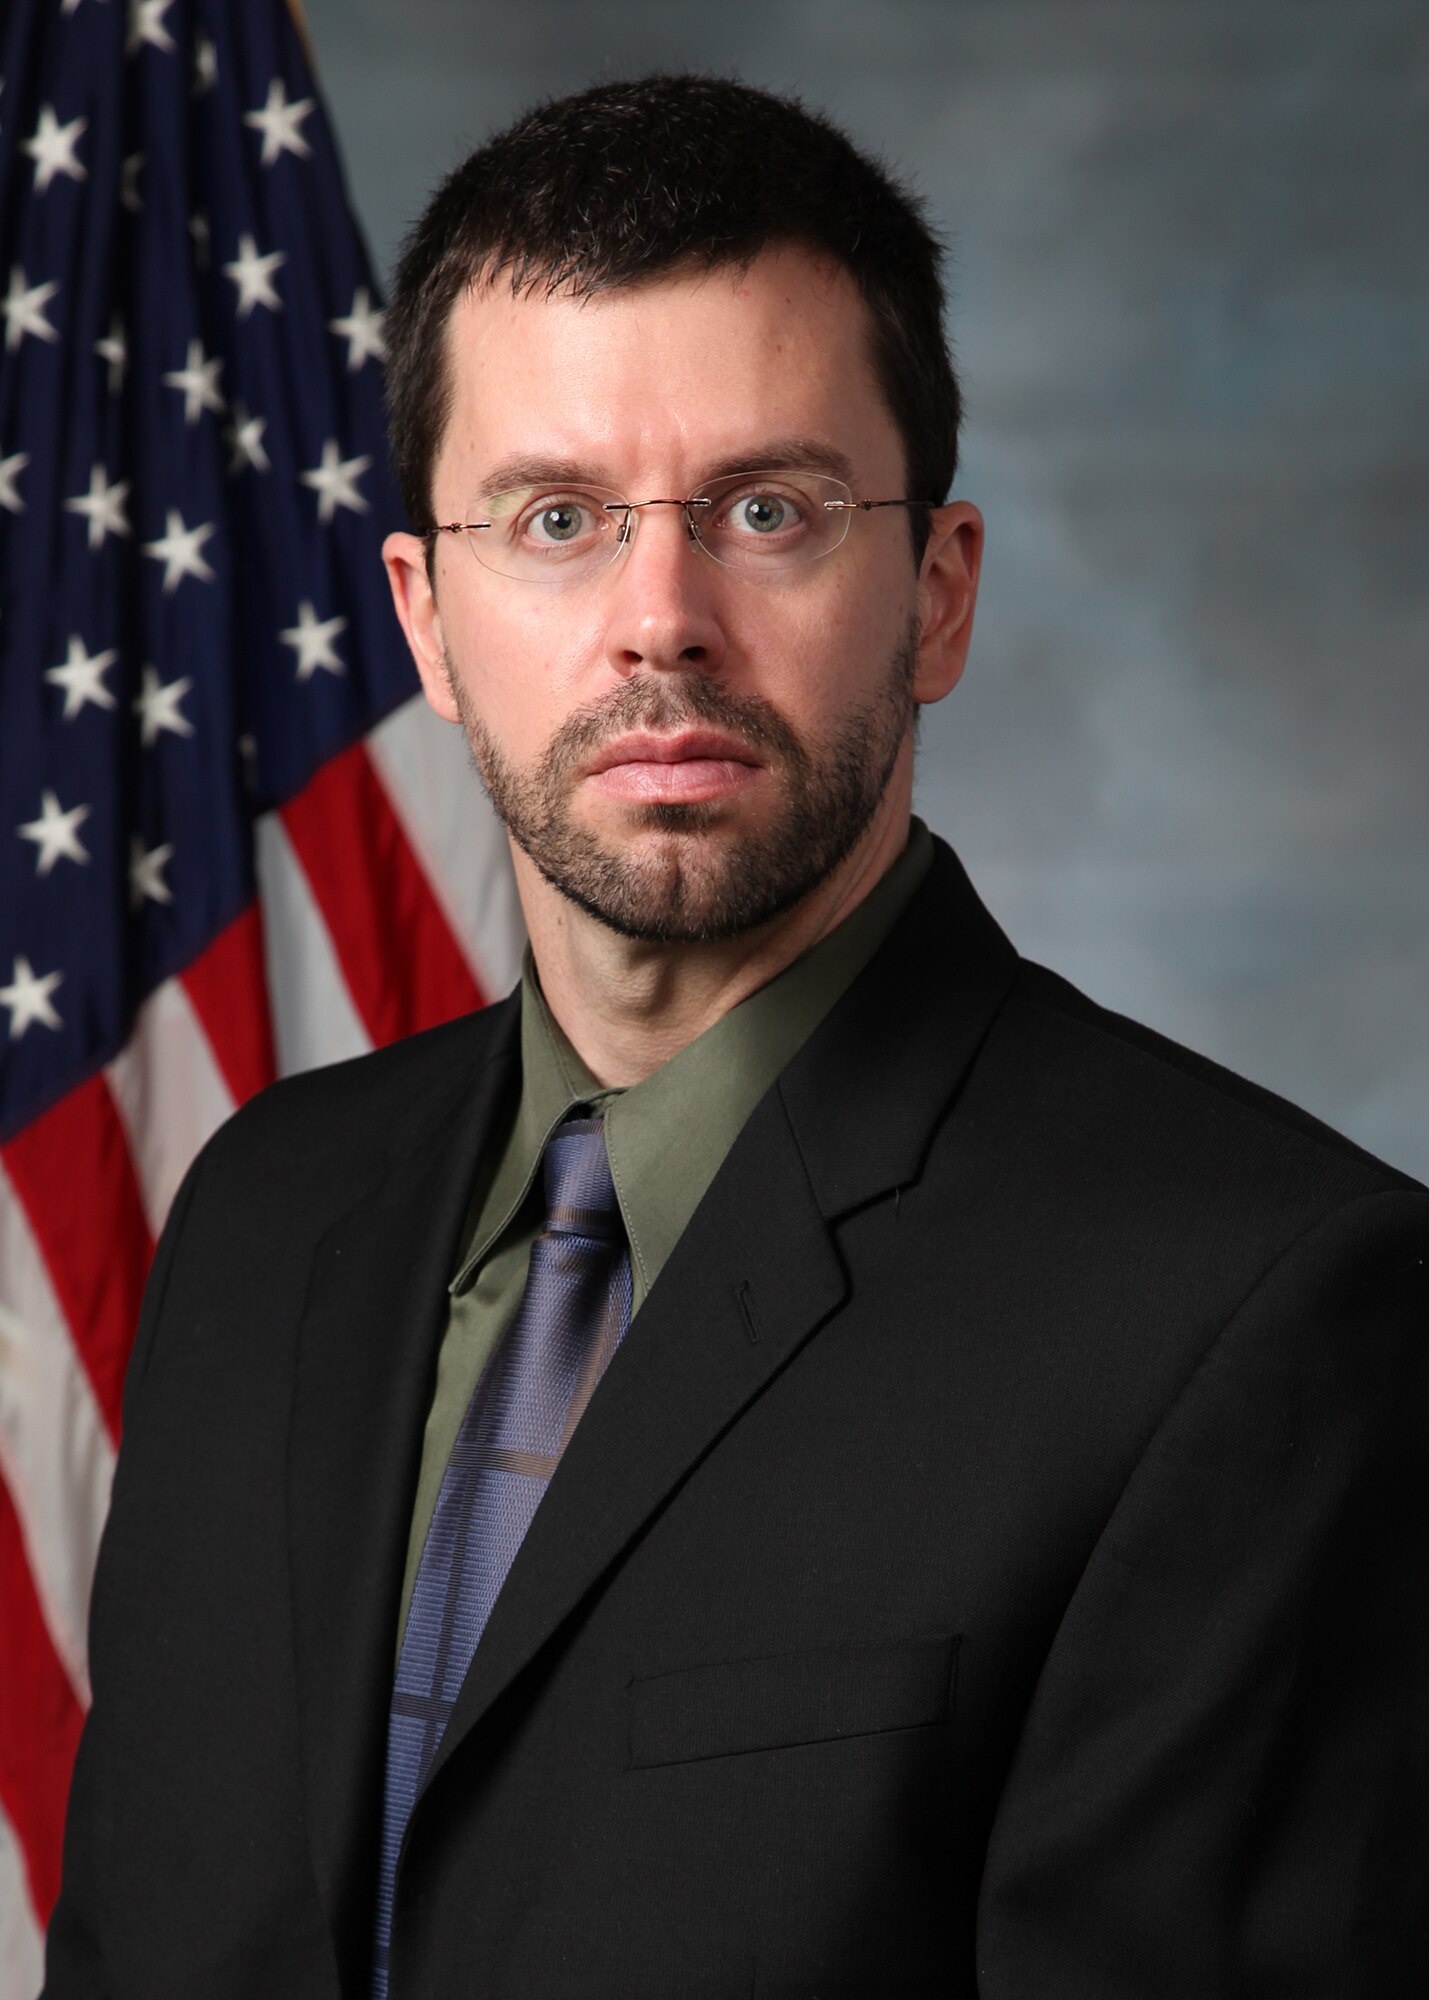 Research physicist Brad Hoff of the AFRL Directed Energy Directorate at Kirtland was selected as an S&E Early Career Award recipient. He distinguished himself as a principal investigator for the joint Air Force-Navy high-power microwave source effort that will be integrated into a mobile system for an upcoming technology demonstration.